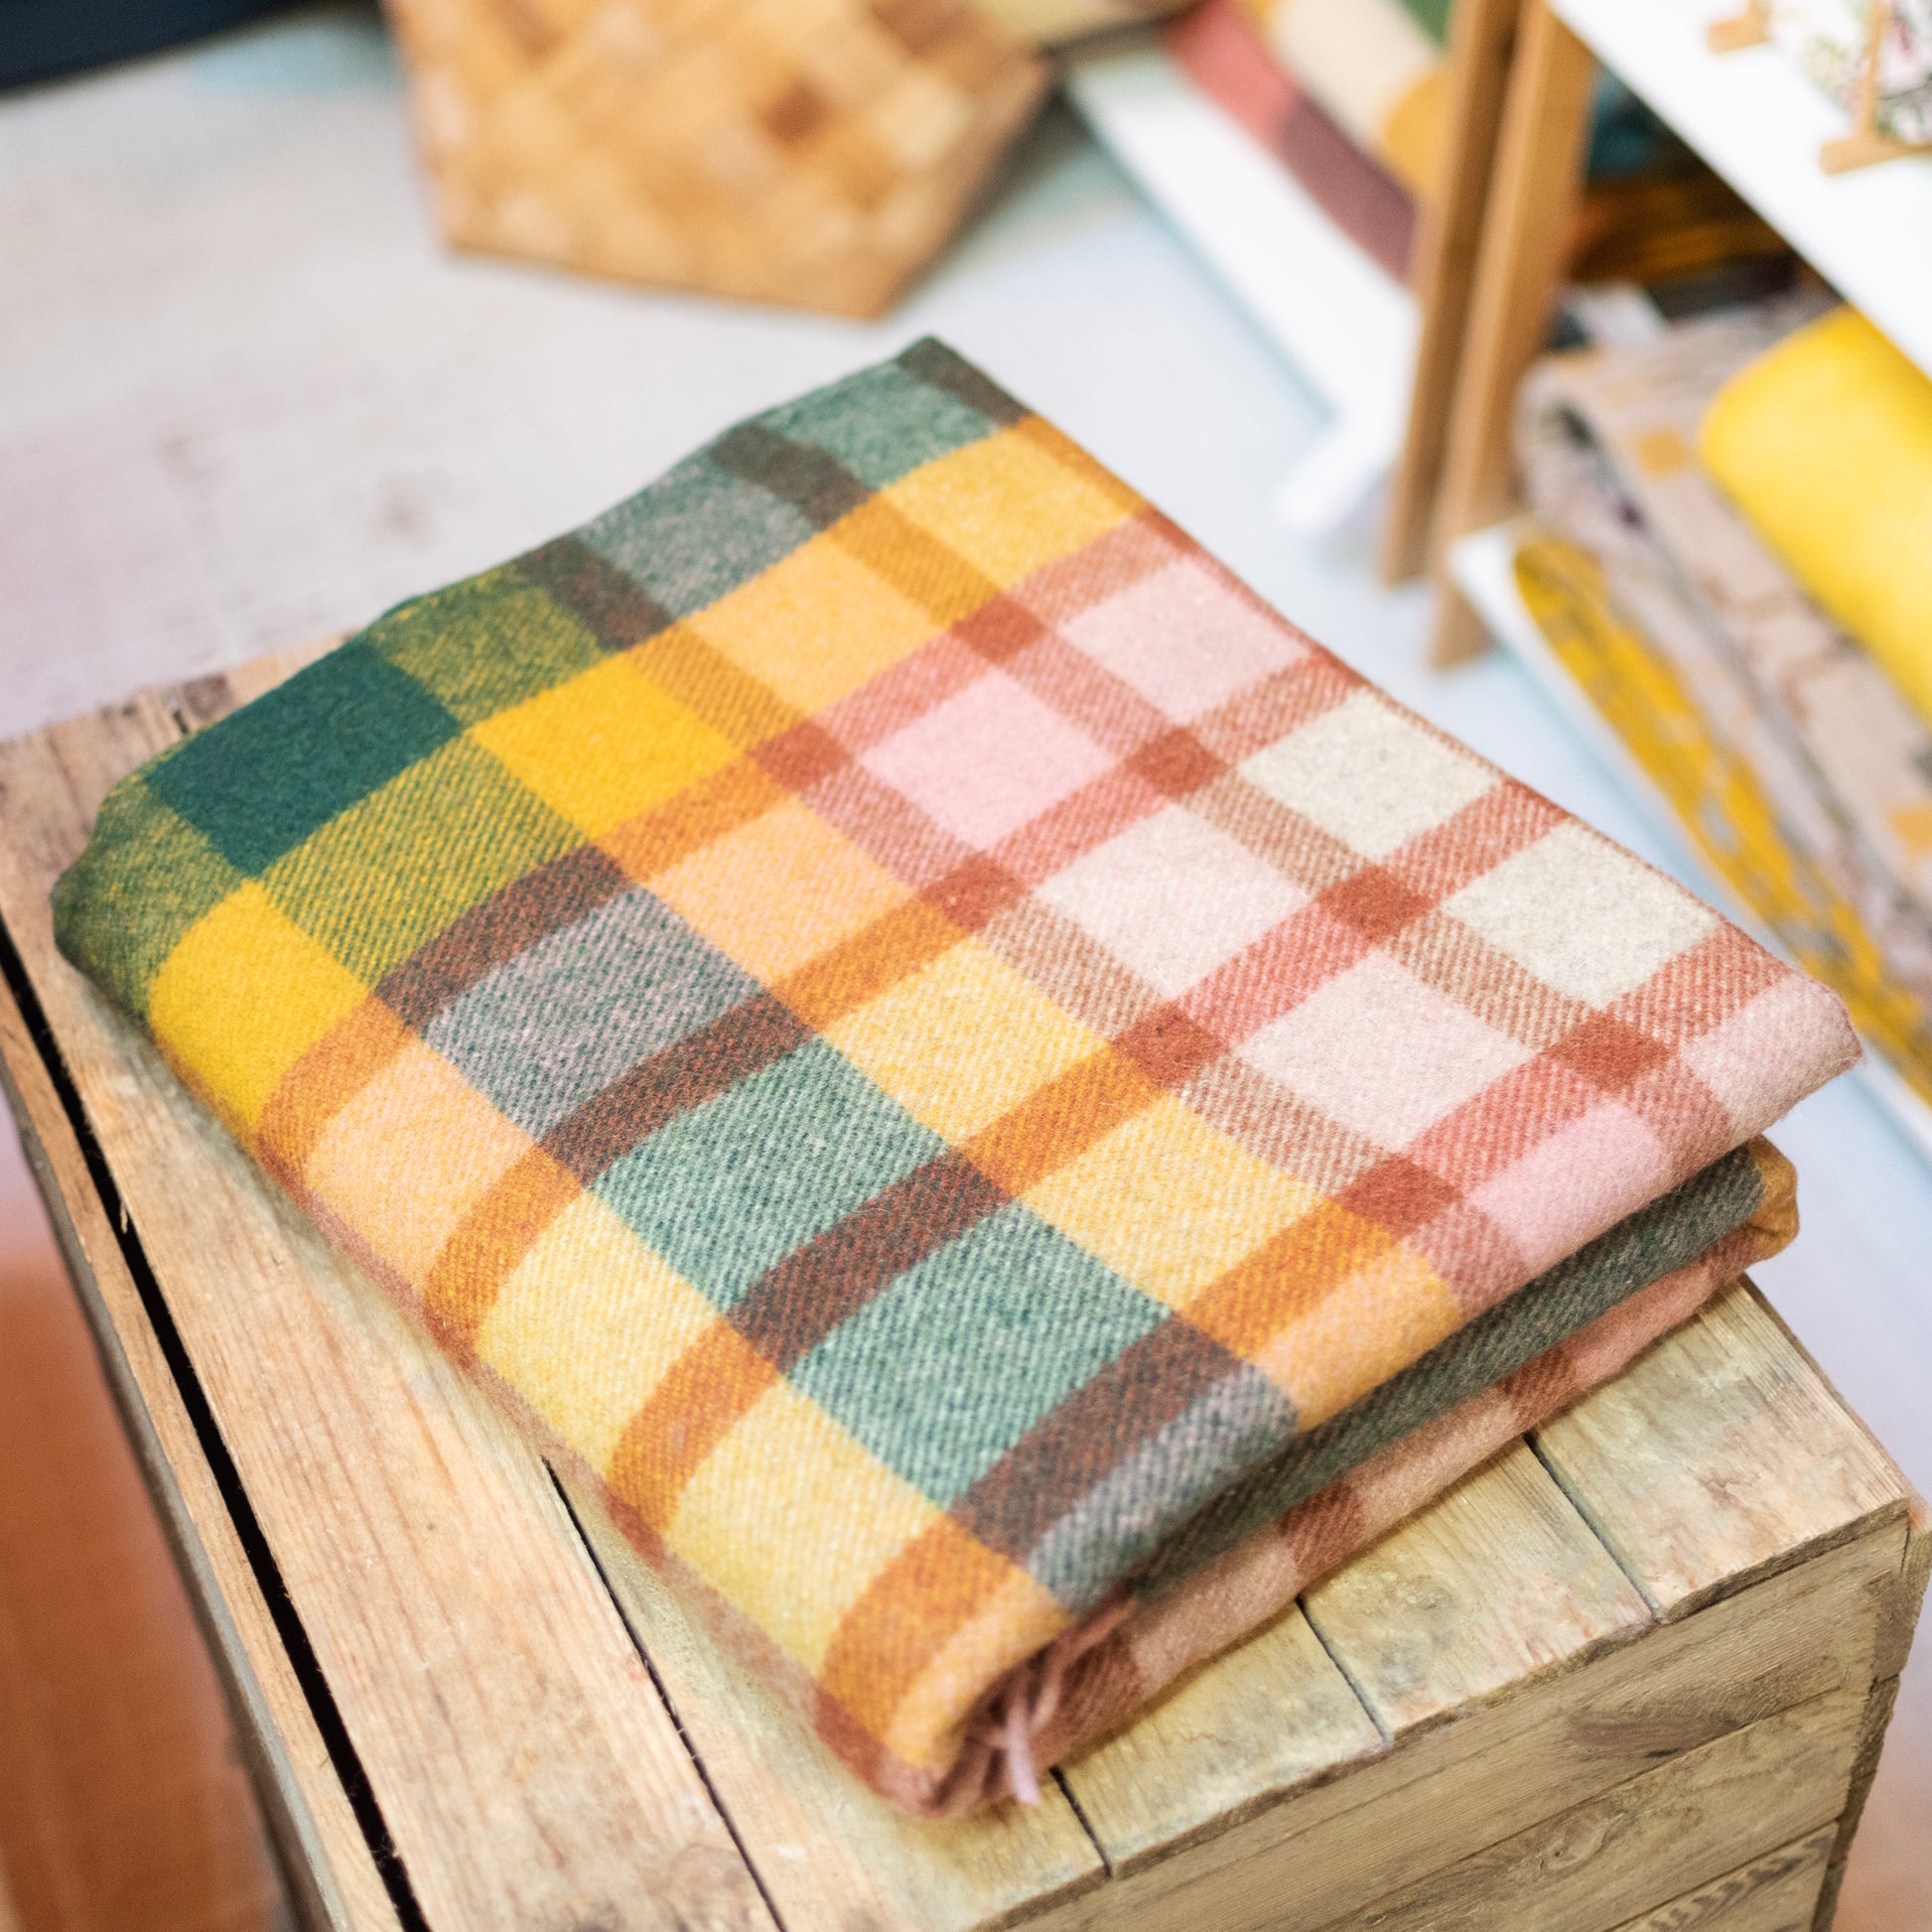 Recycled Wool Blanket in Green Gingham - THE BRISTOL ARTISAN